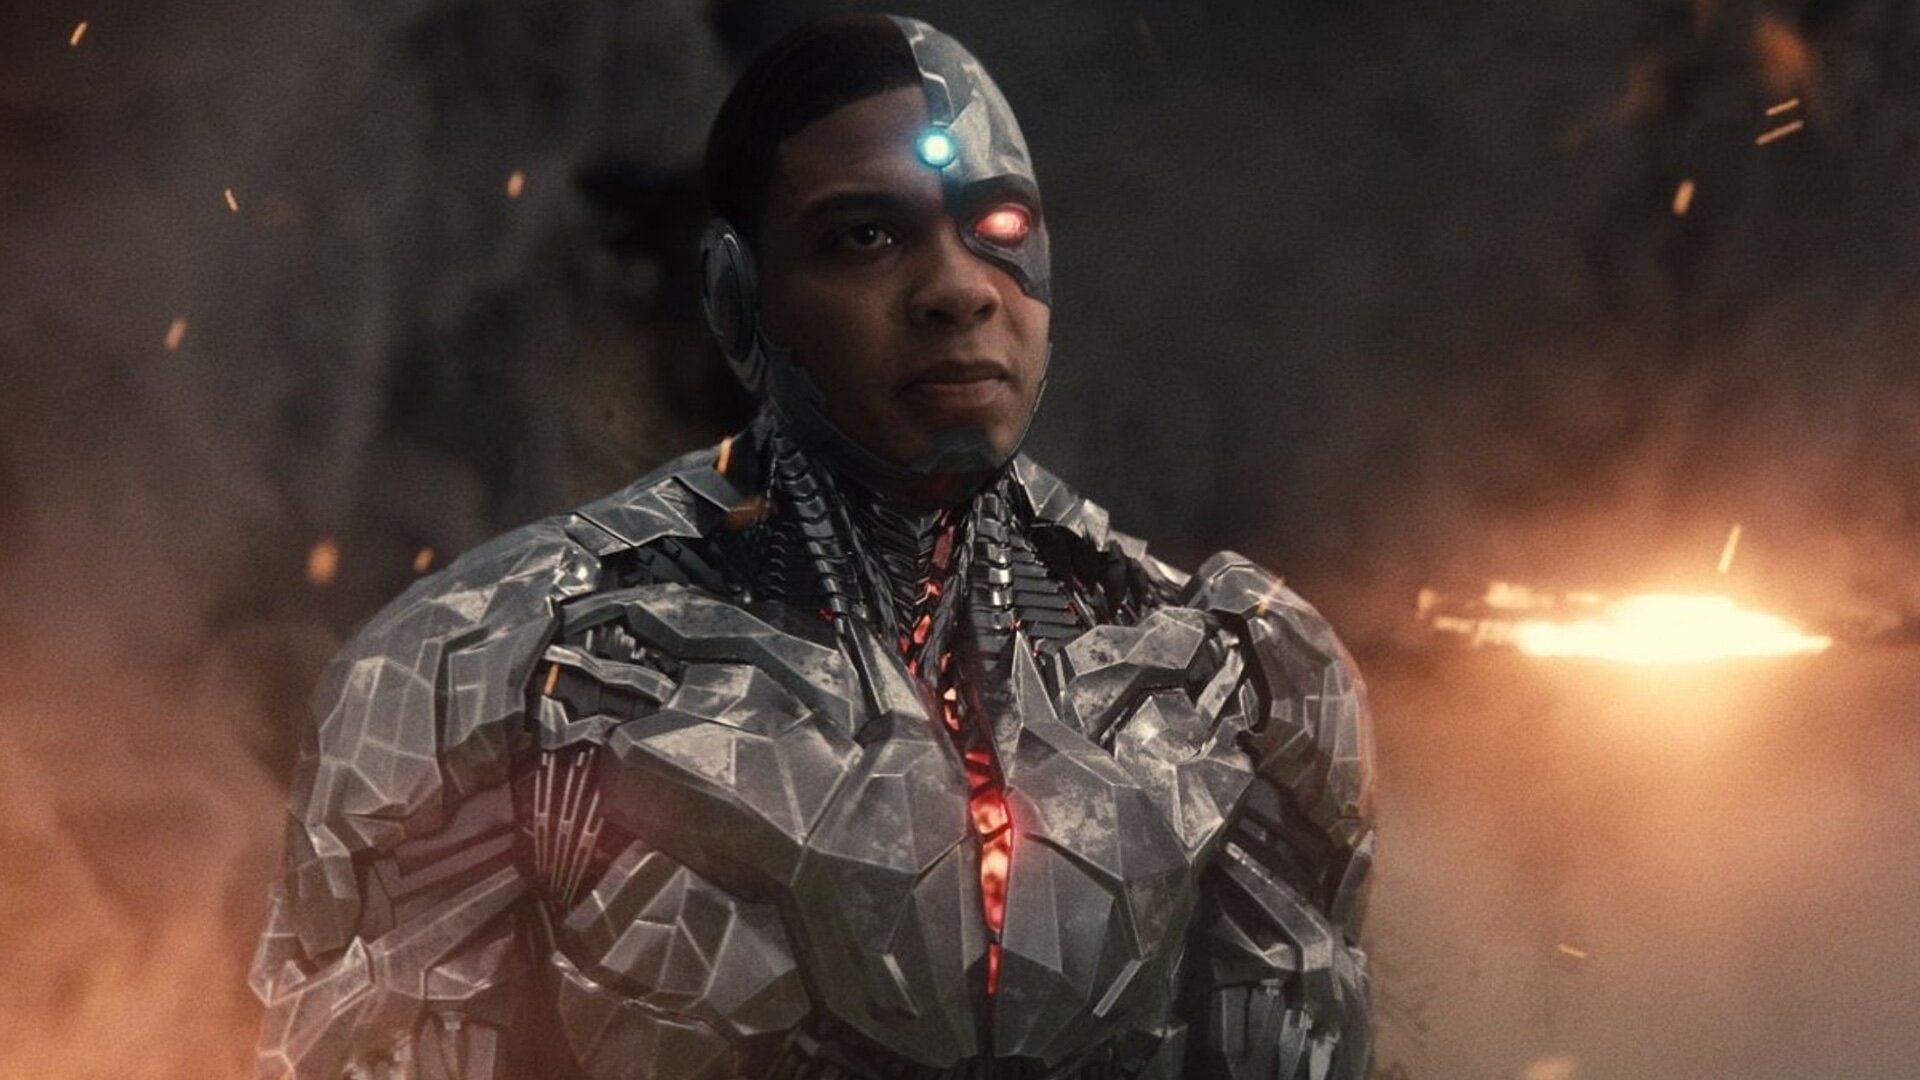 Cyborg, half-man and half-machine, uses his technological prowess to defend the planet from threats both human and alien (Image via DC Studios)